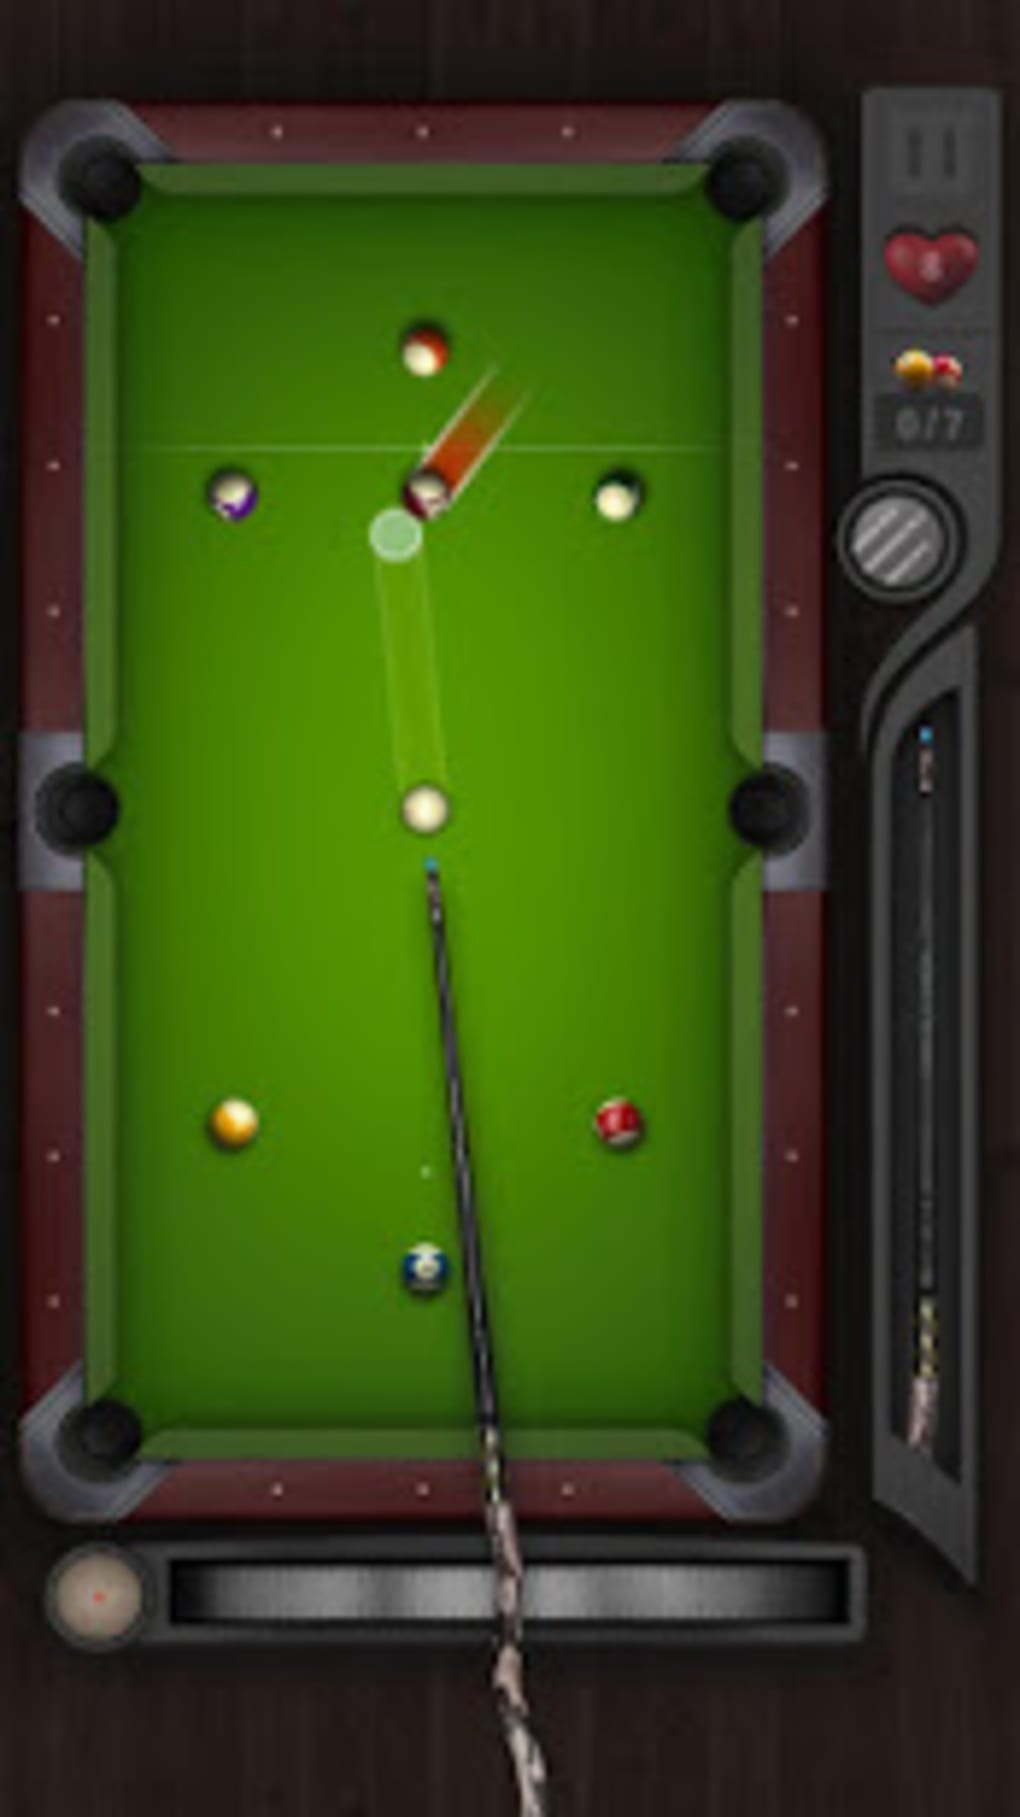 Shooting Ball APK for Android